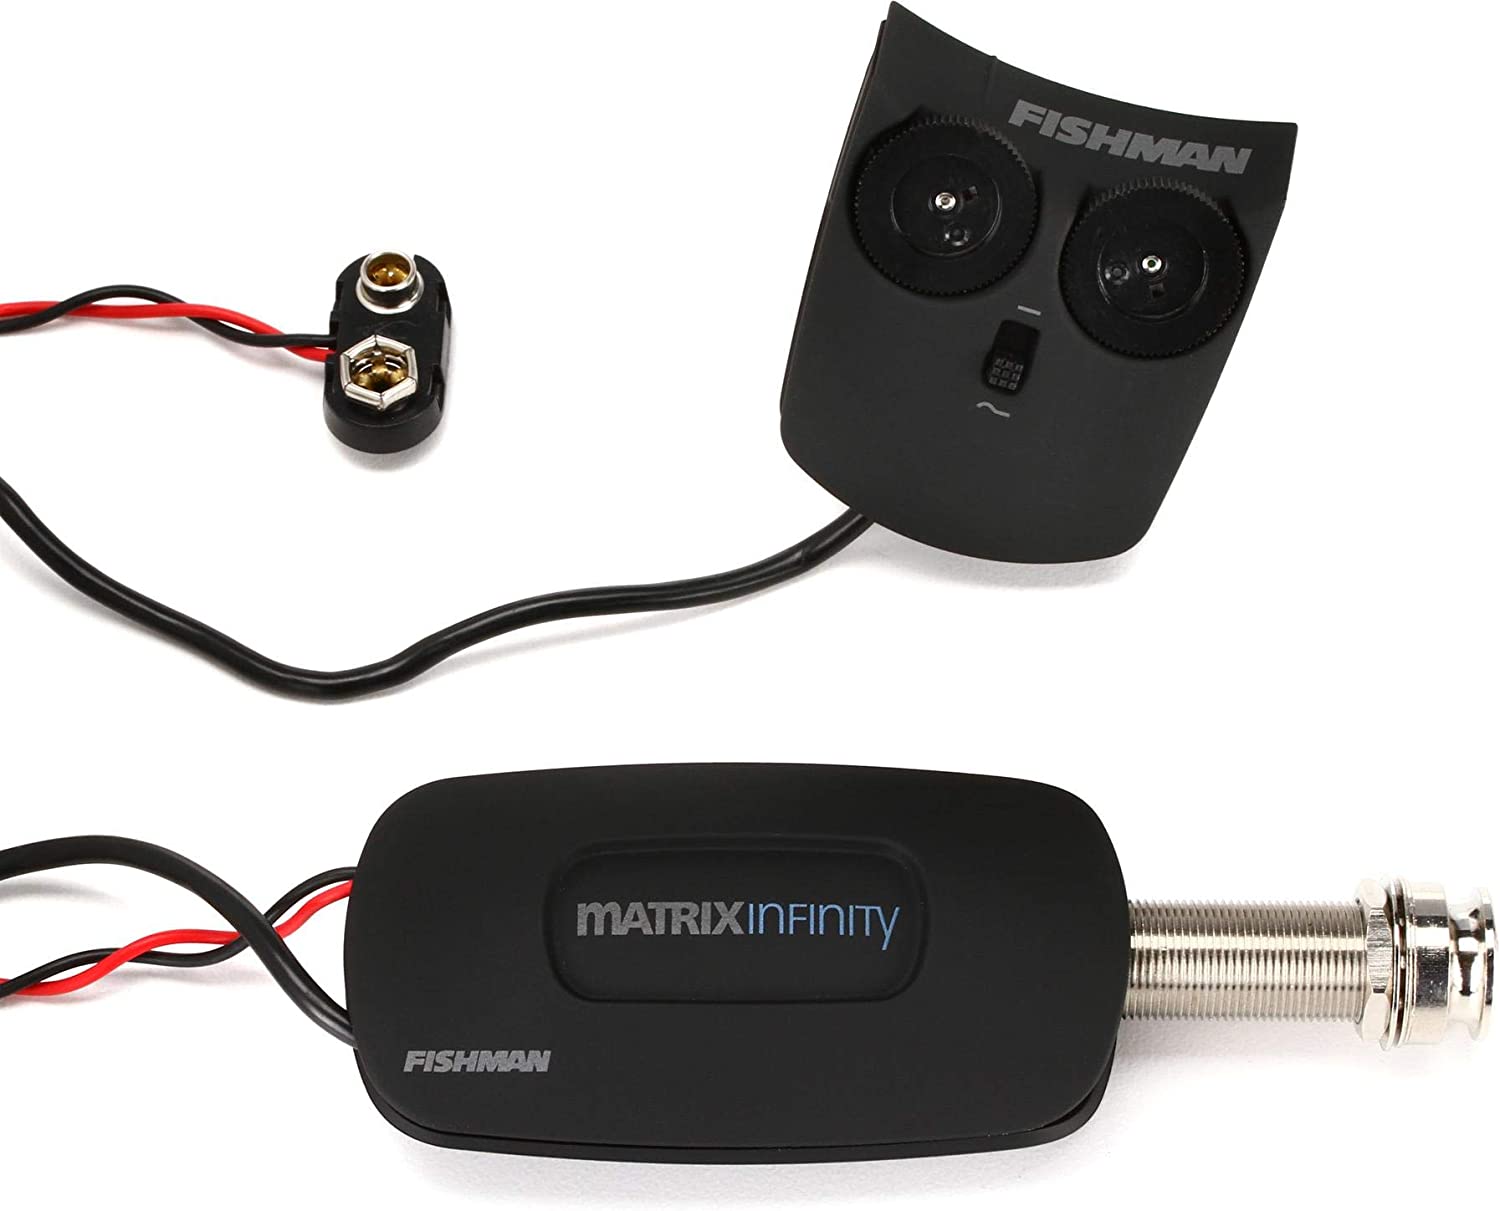 Fishman Matrix Infinity VT Acoustic Pickup (Wide) on a white background